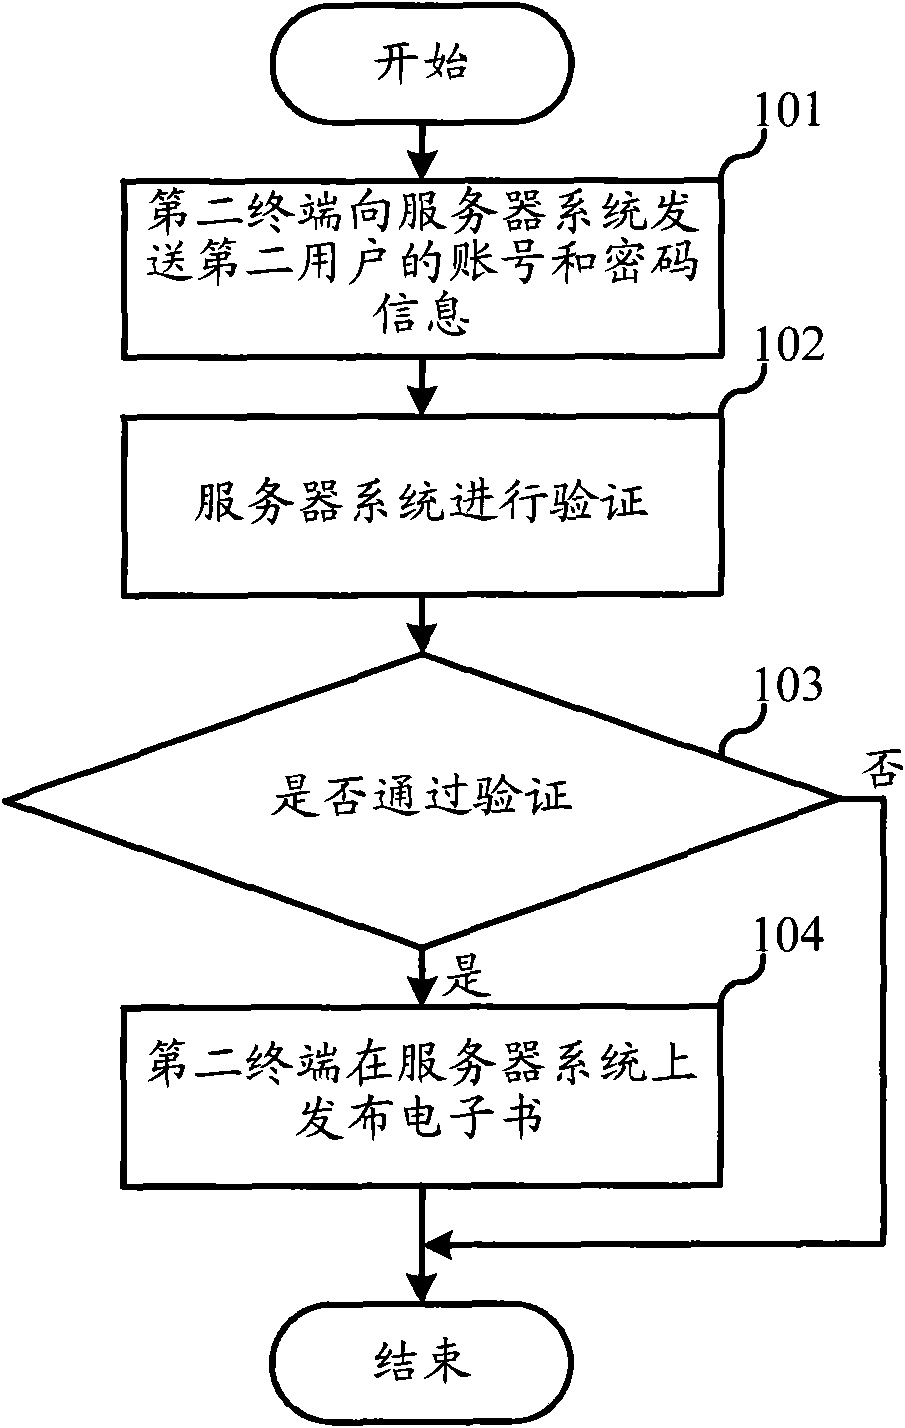 E-book publishing and acquiring method and service system thereof